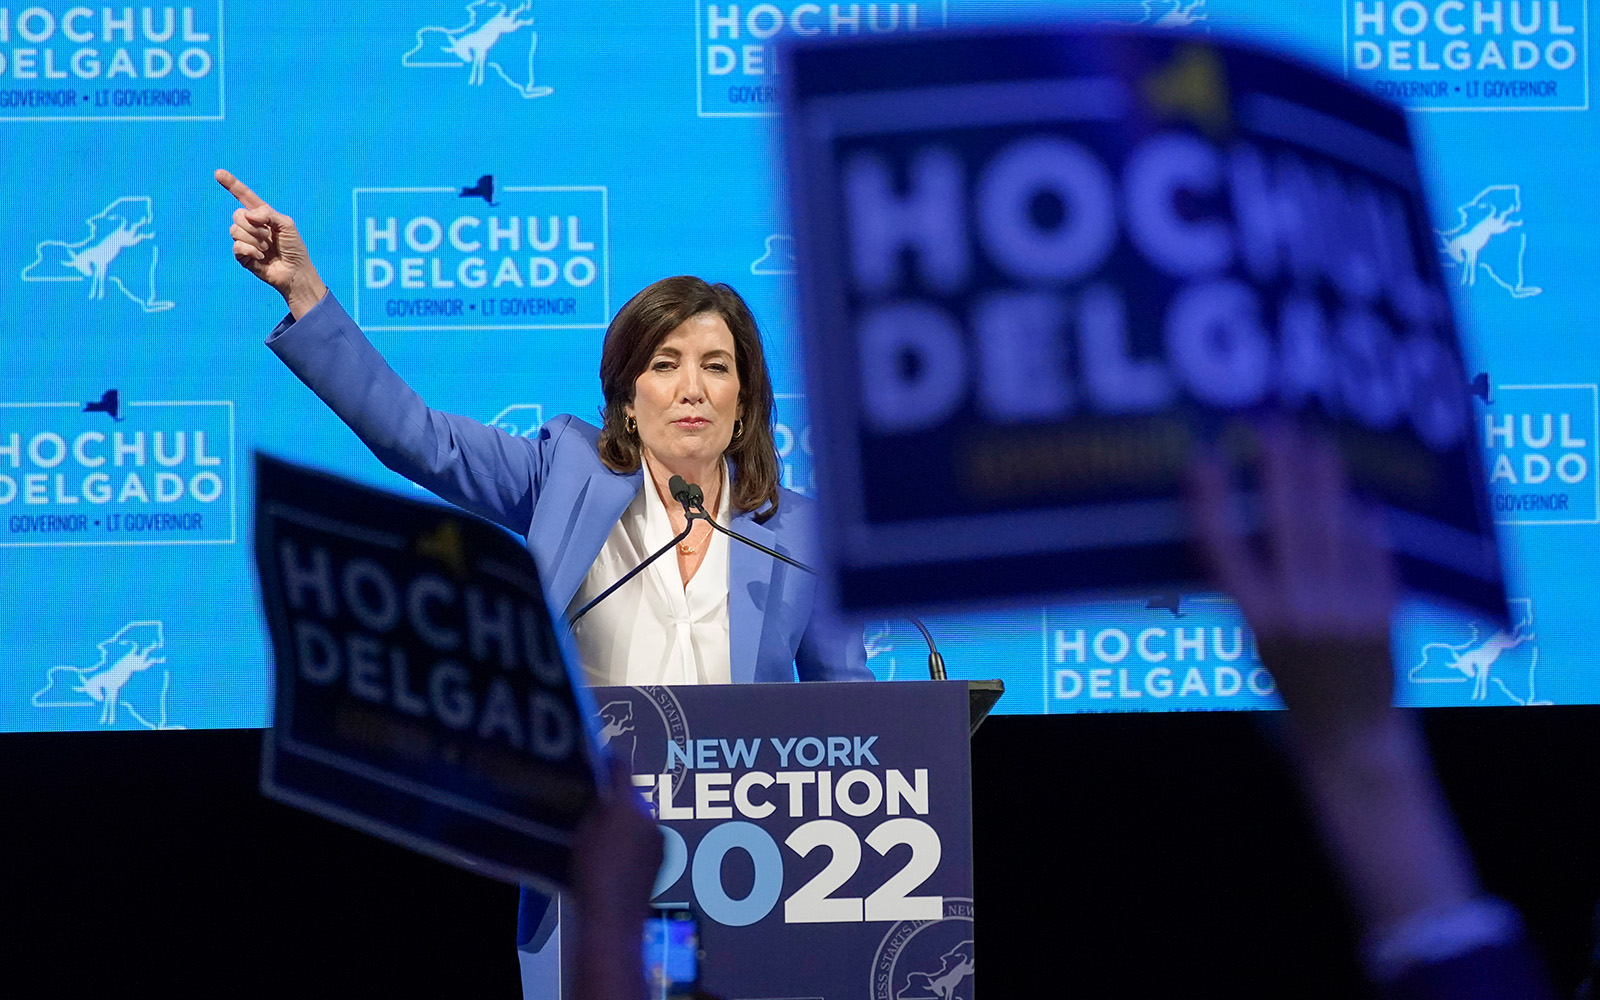 Hochul triumphs over Jewish challenger Zeldin in close New York governor  race | The Times of Israel